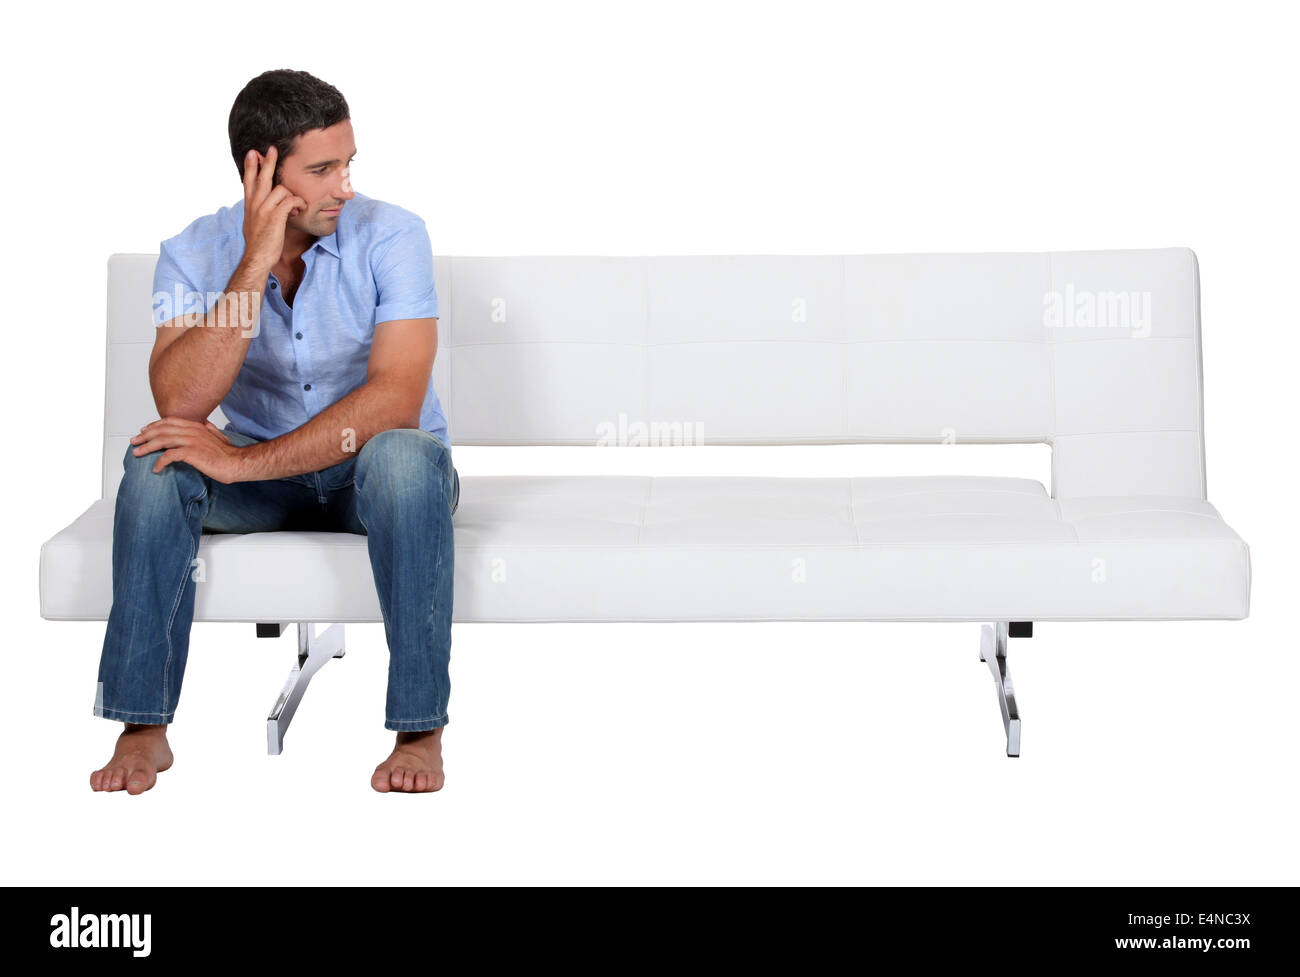 Man alone on the couch Stock Photo